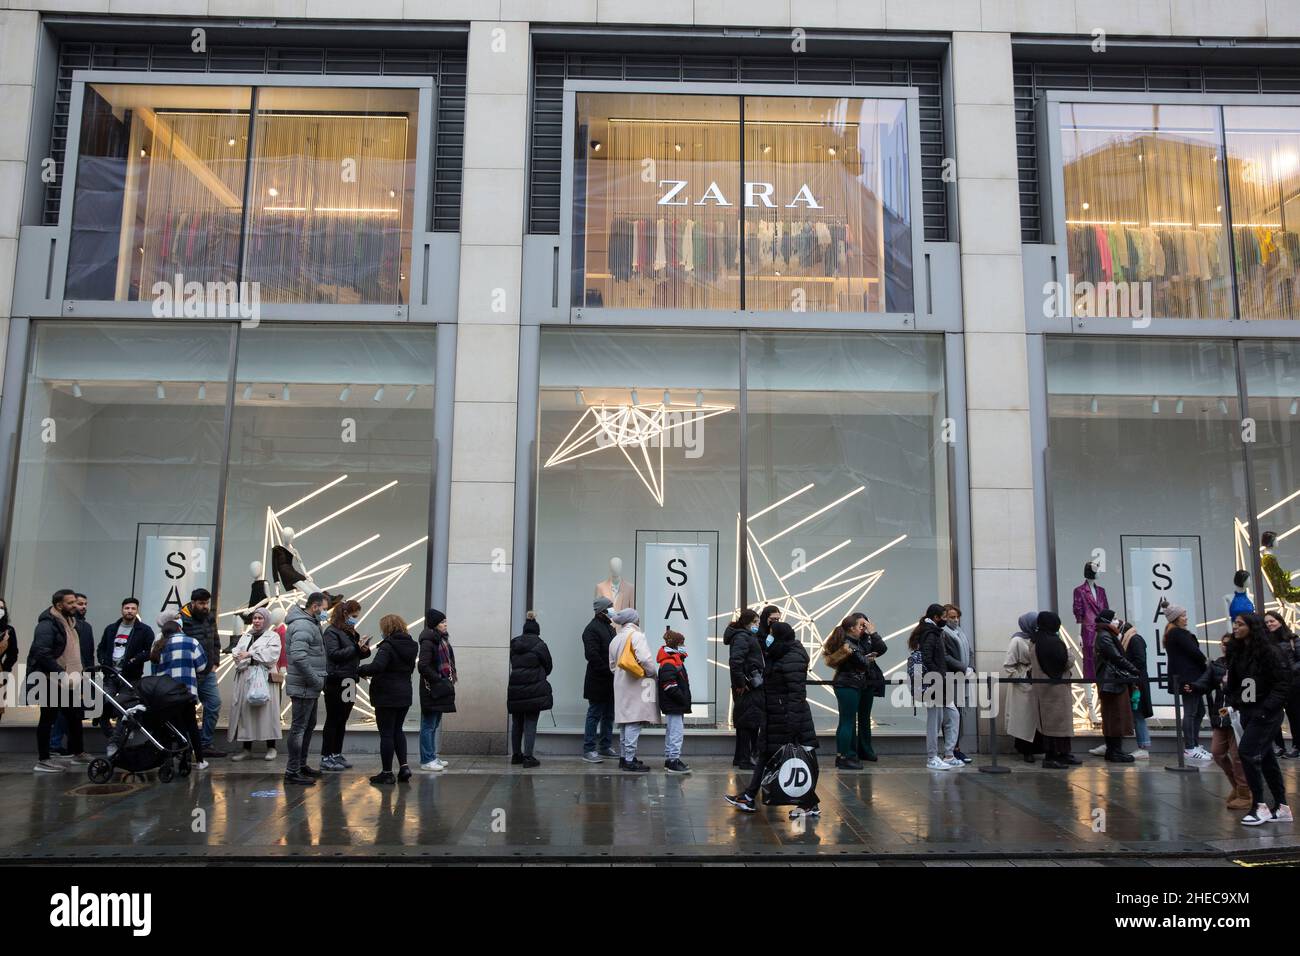 People queue outside a Zara store on Boxing Day in central London as ...